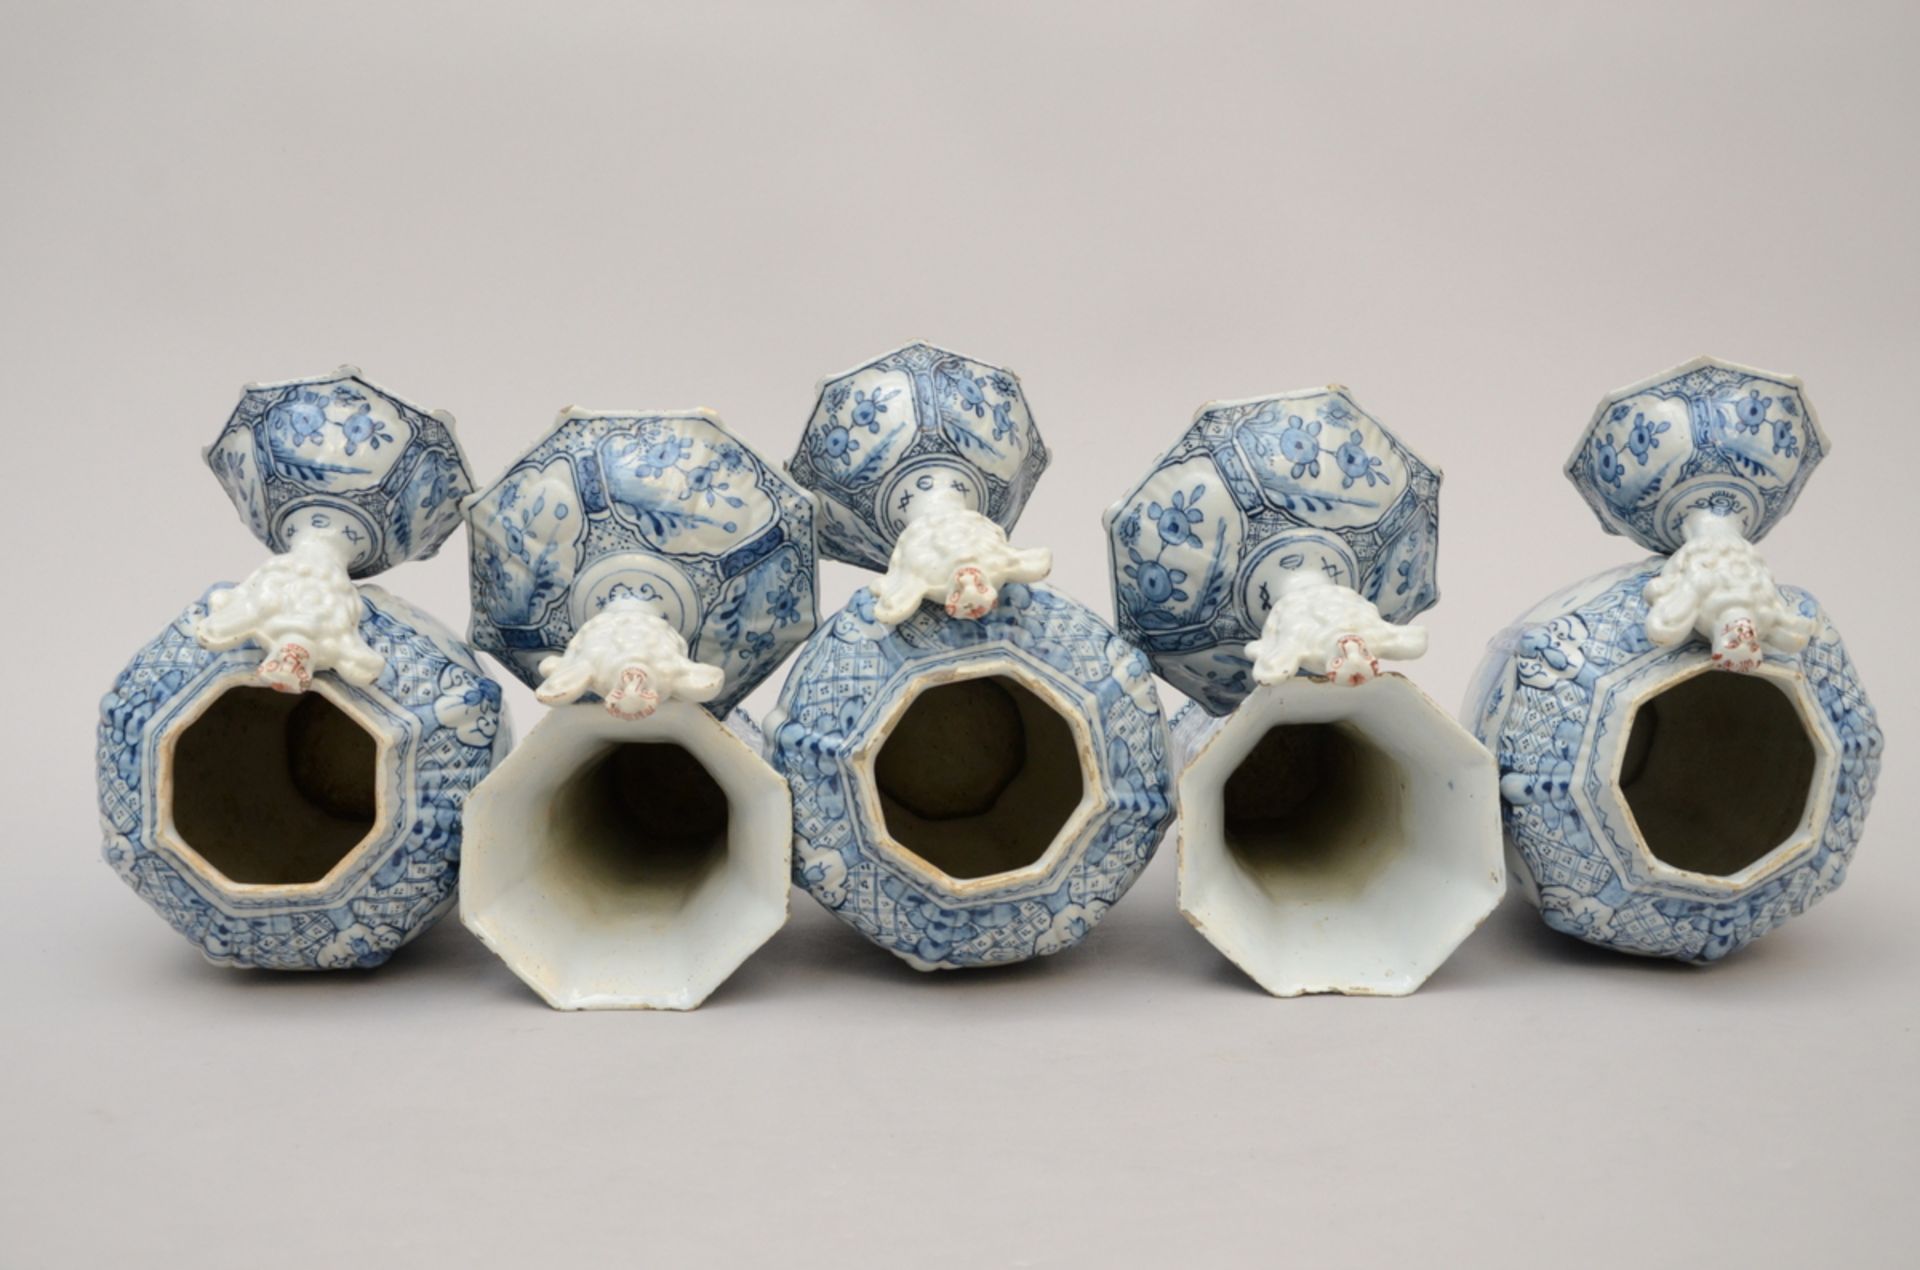 A five-piece blue and white set in Delft earthenware with chinoiserie decoration, 18th century ( - Image 4 of 6